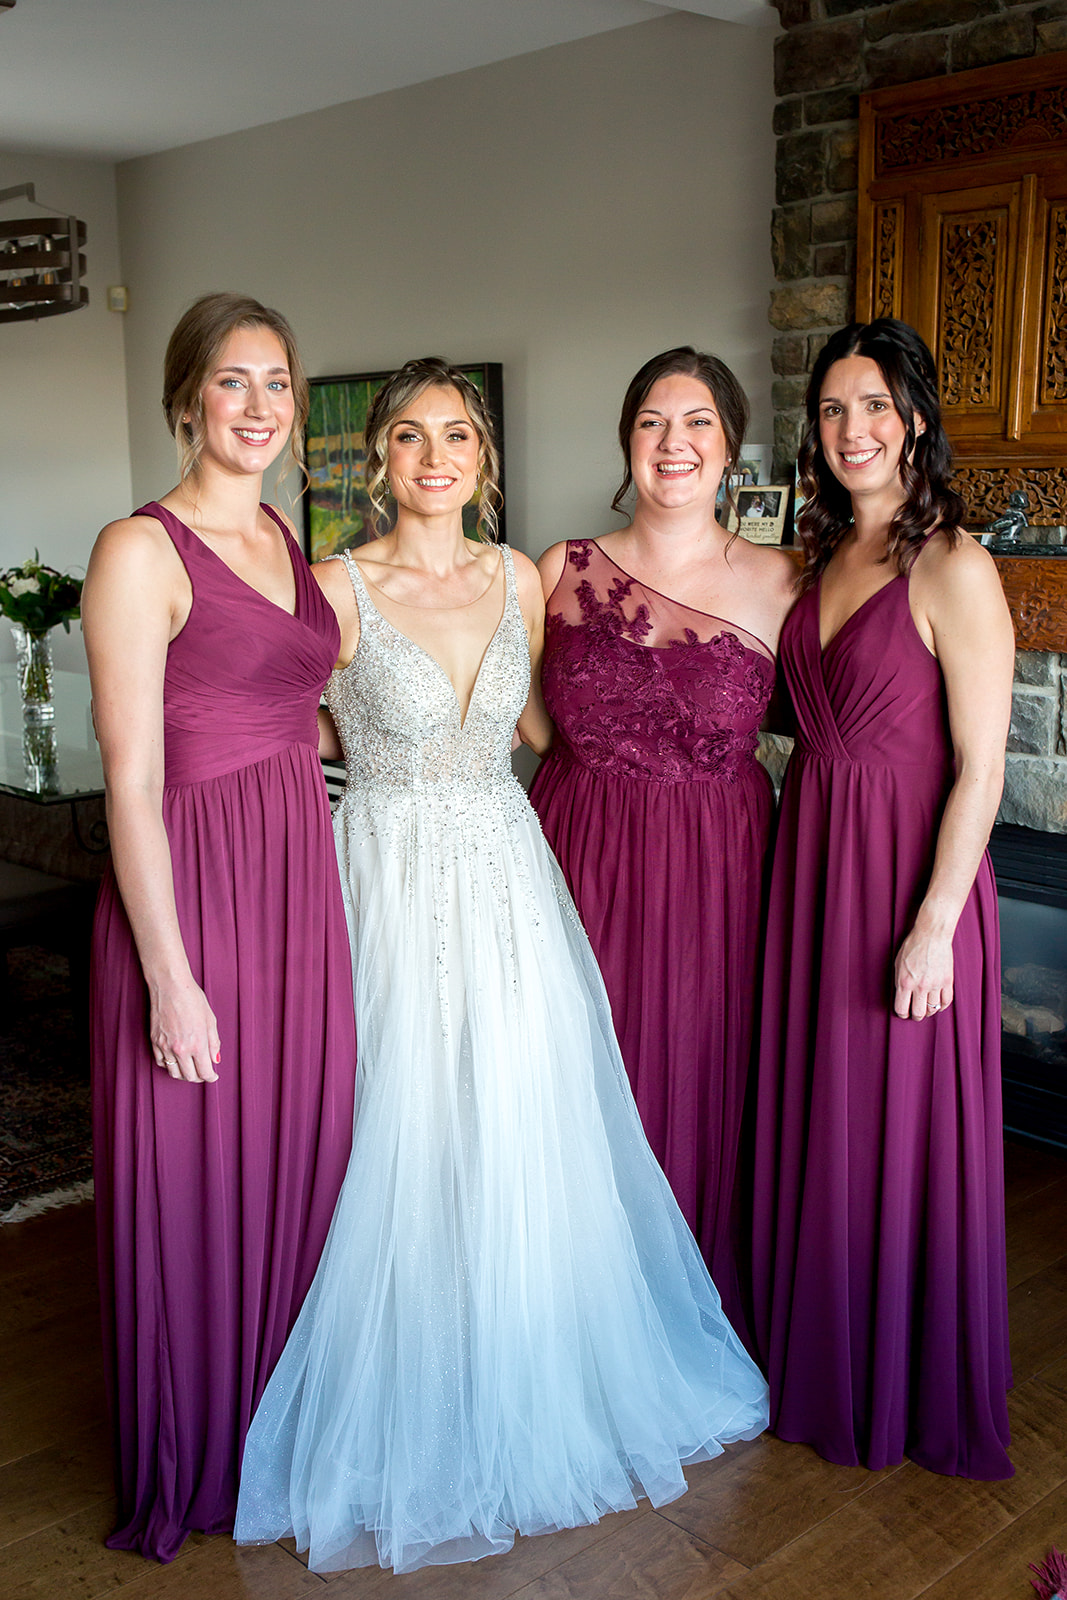 Bride stands amongst her bridesmaids wearing long, burgundy dresses as they all smile and pose before the Monte Creek Winery wedding ceremony